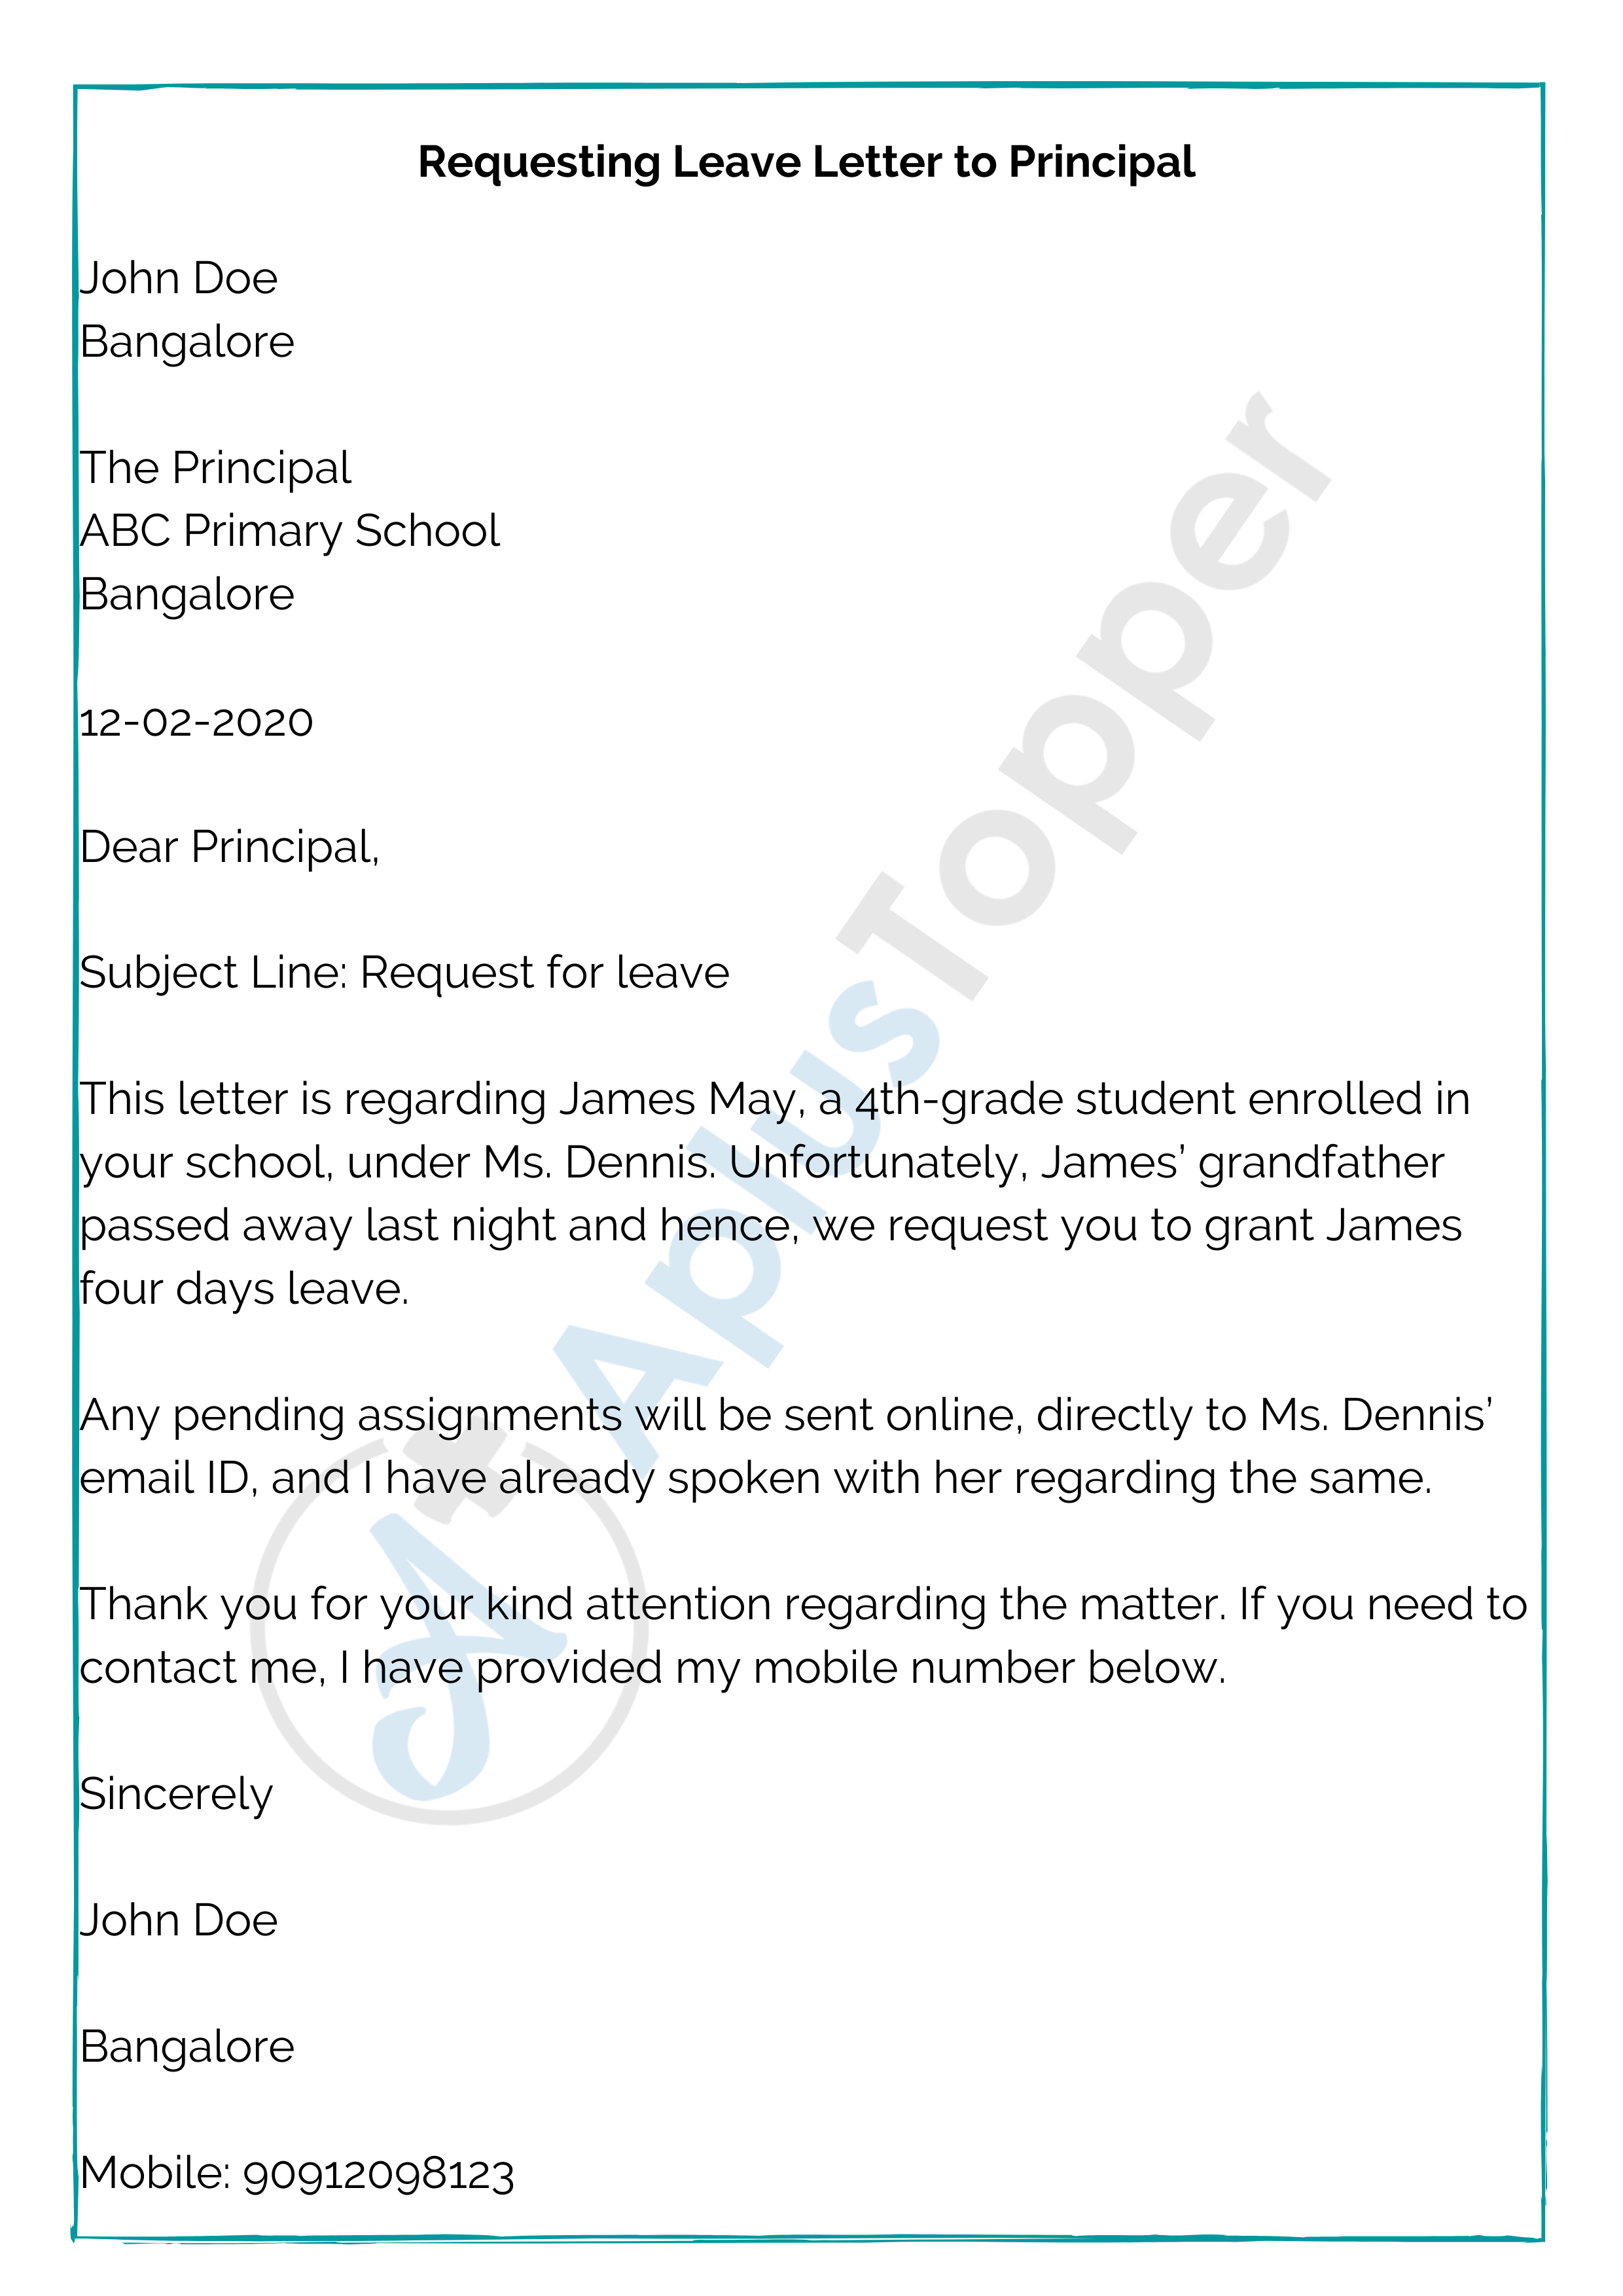 Letter To Principal | Format, Sample And How To Write An Letter To  Principal? - A Plus Topper